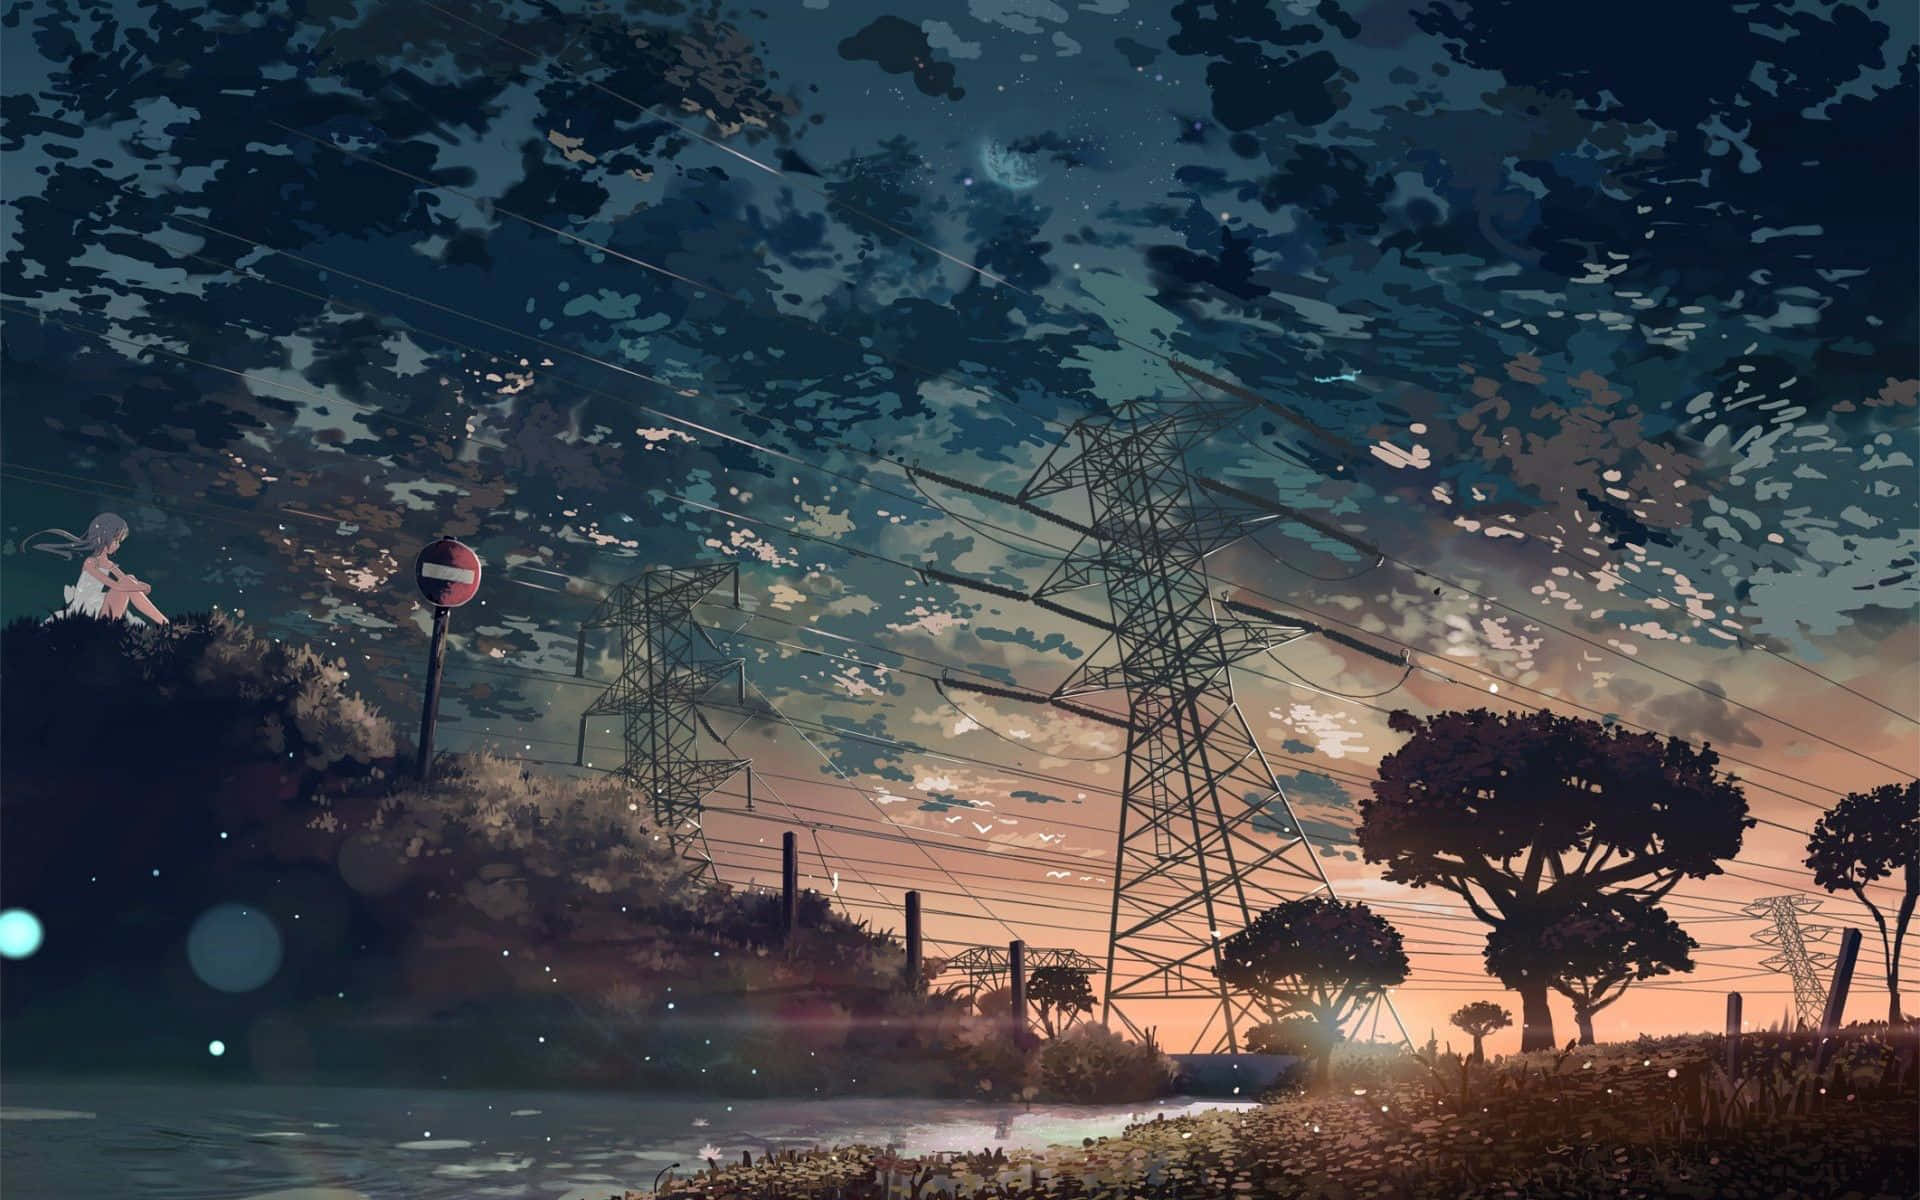 Epic Anime Backgrounds 70 pictures